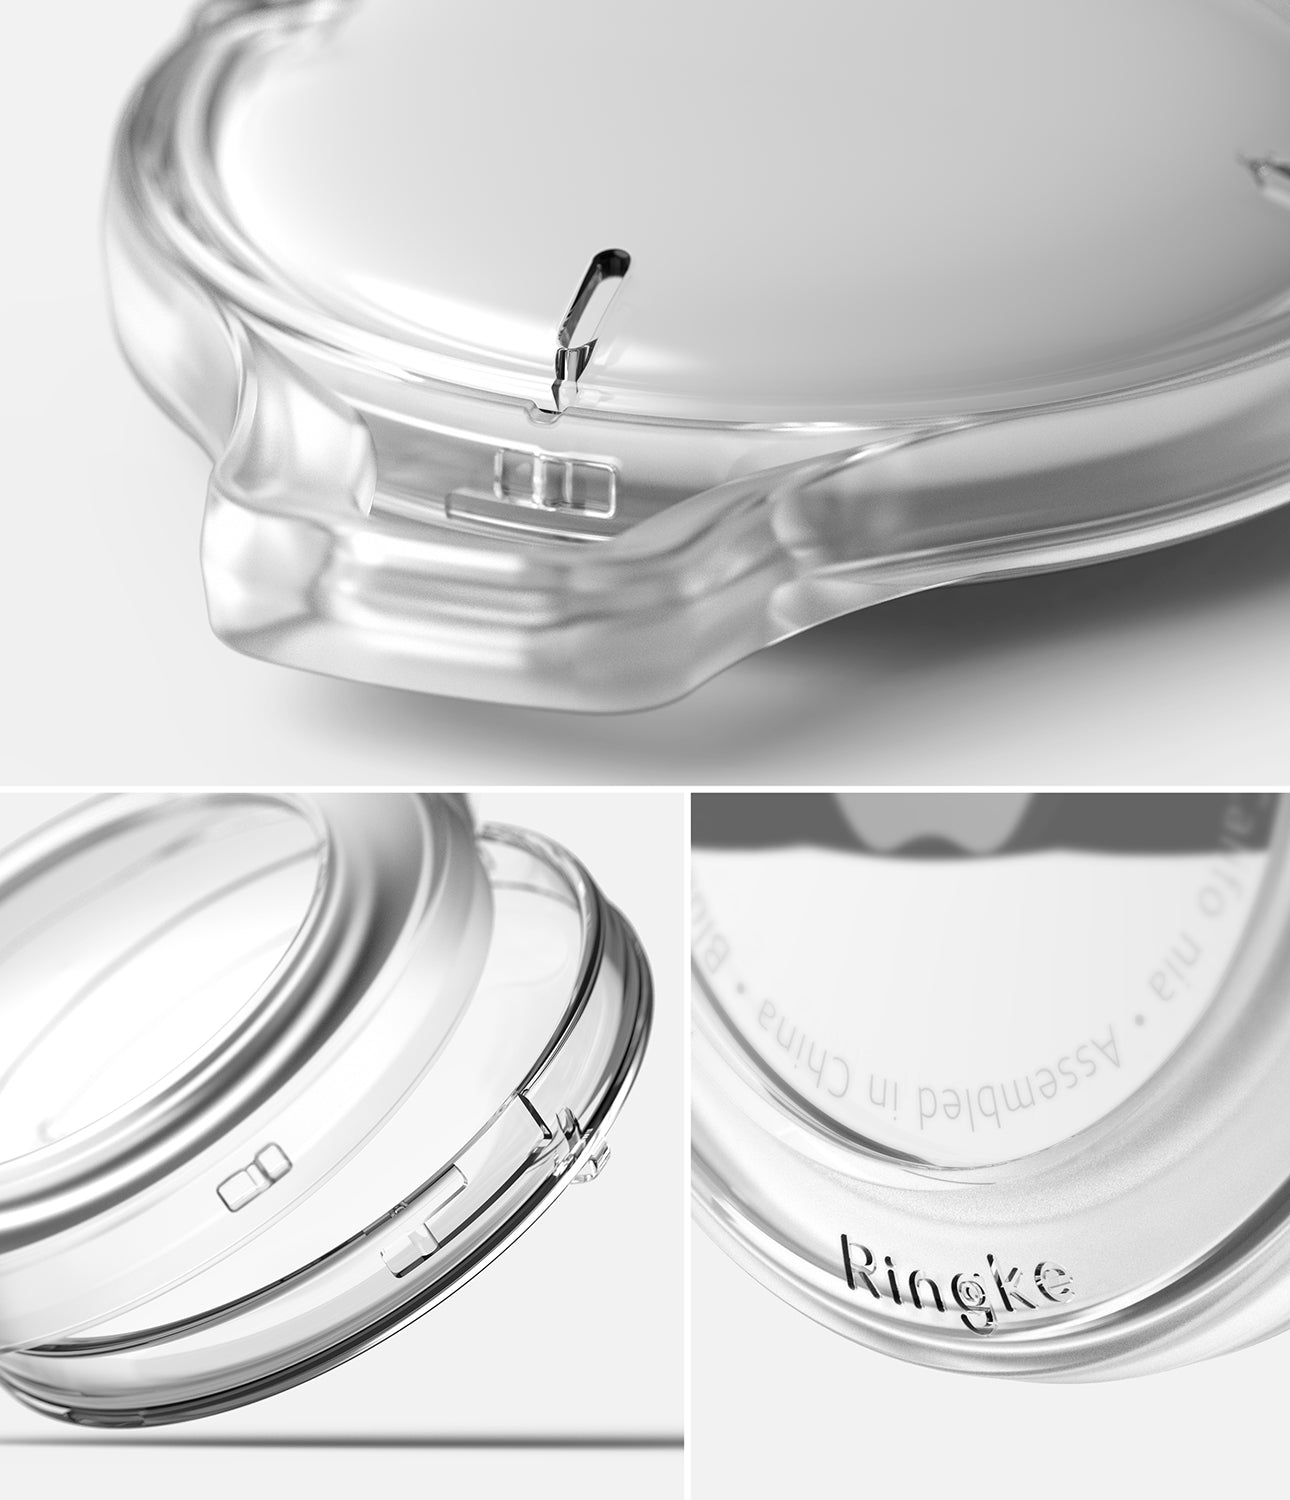 ringke airtag case 4 pack clear